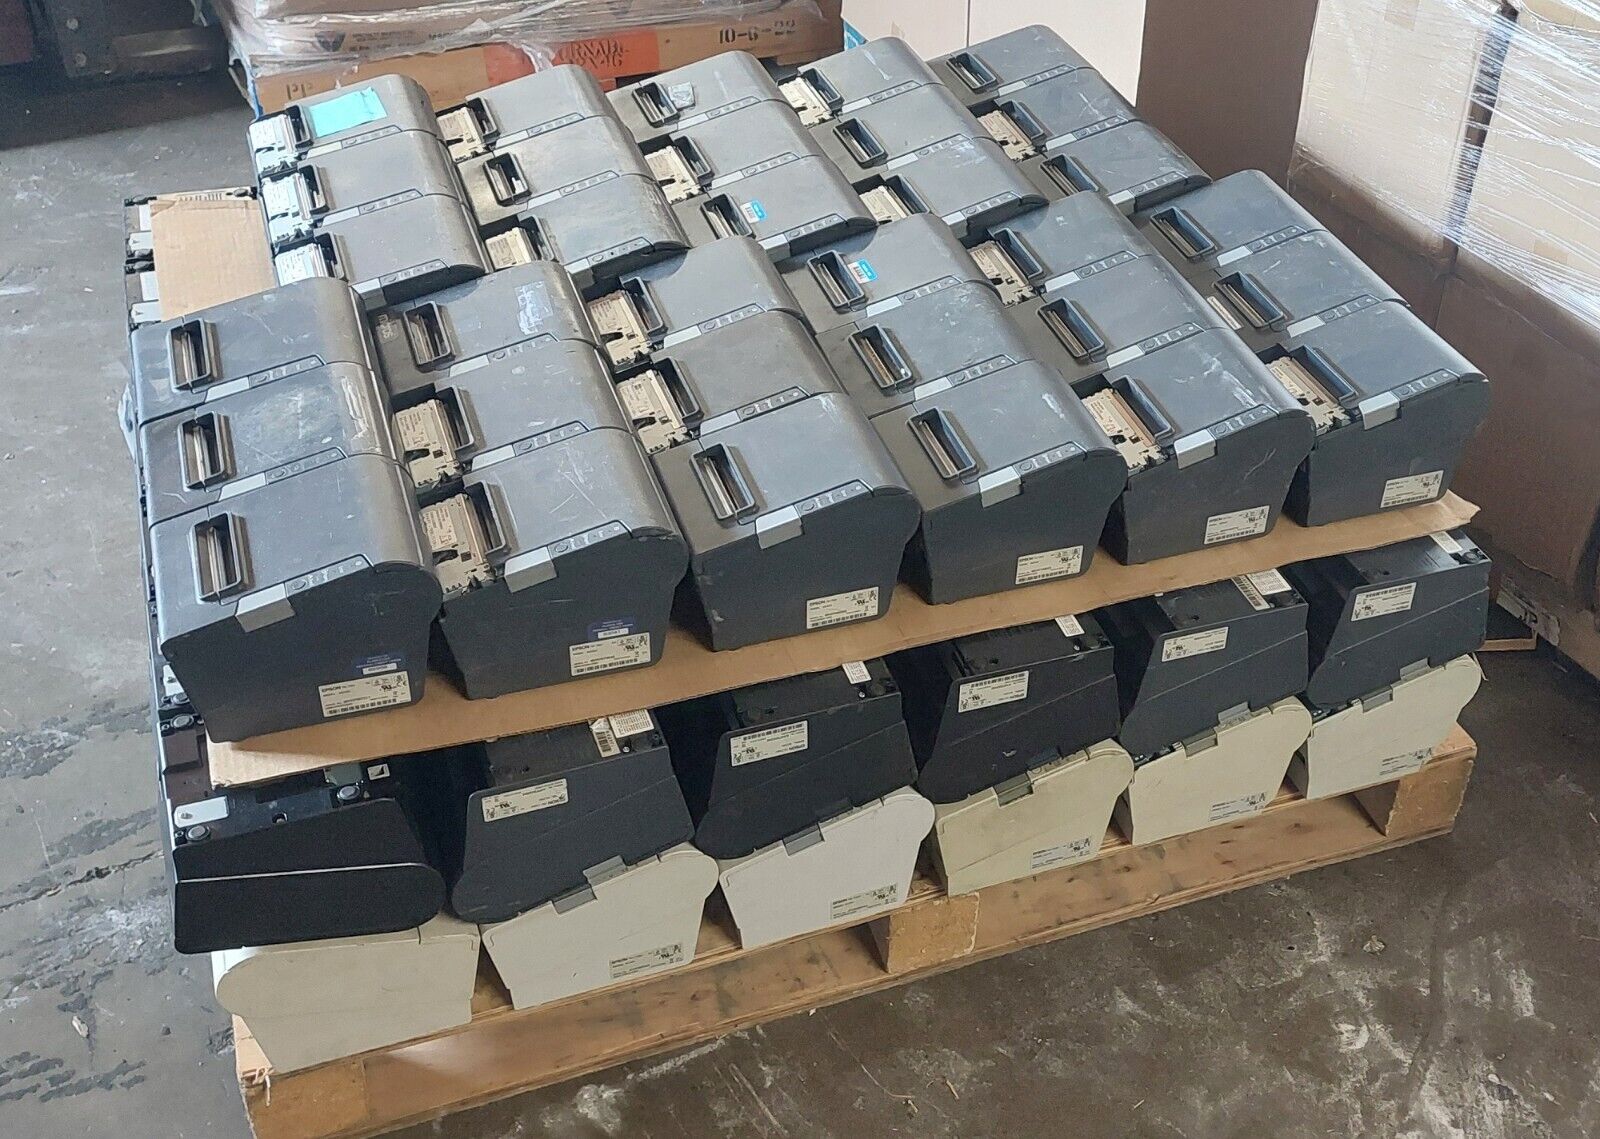 Lot of 100+ Epson TM-T88IV, TM-T88V, TM-T88VI Receipt Printers (For Parts)